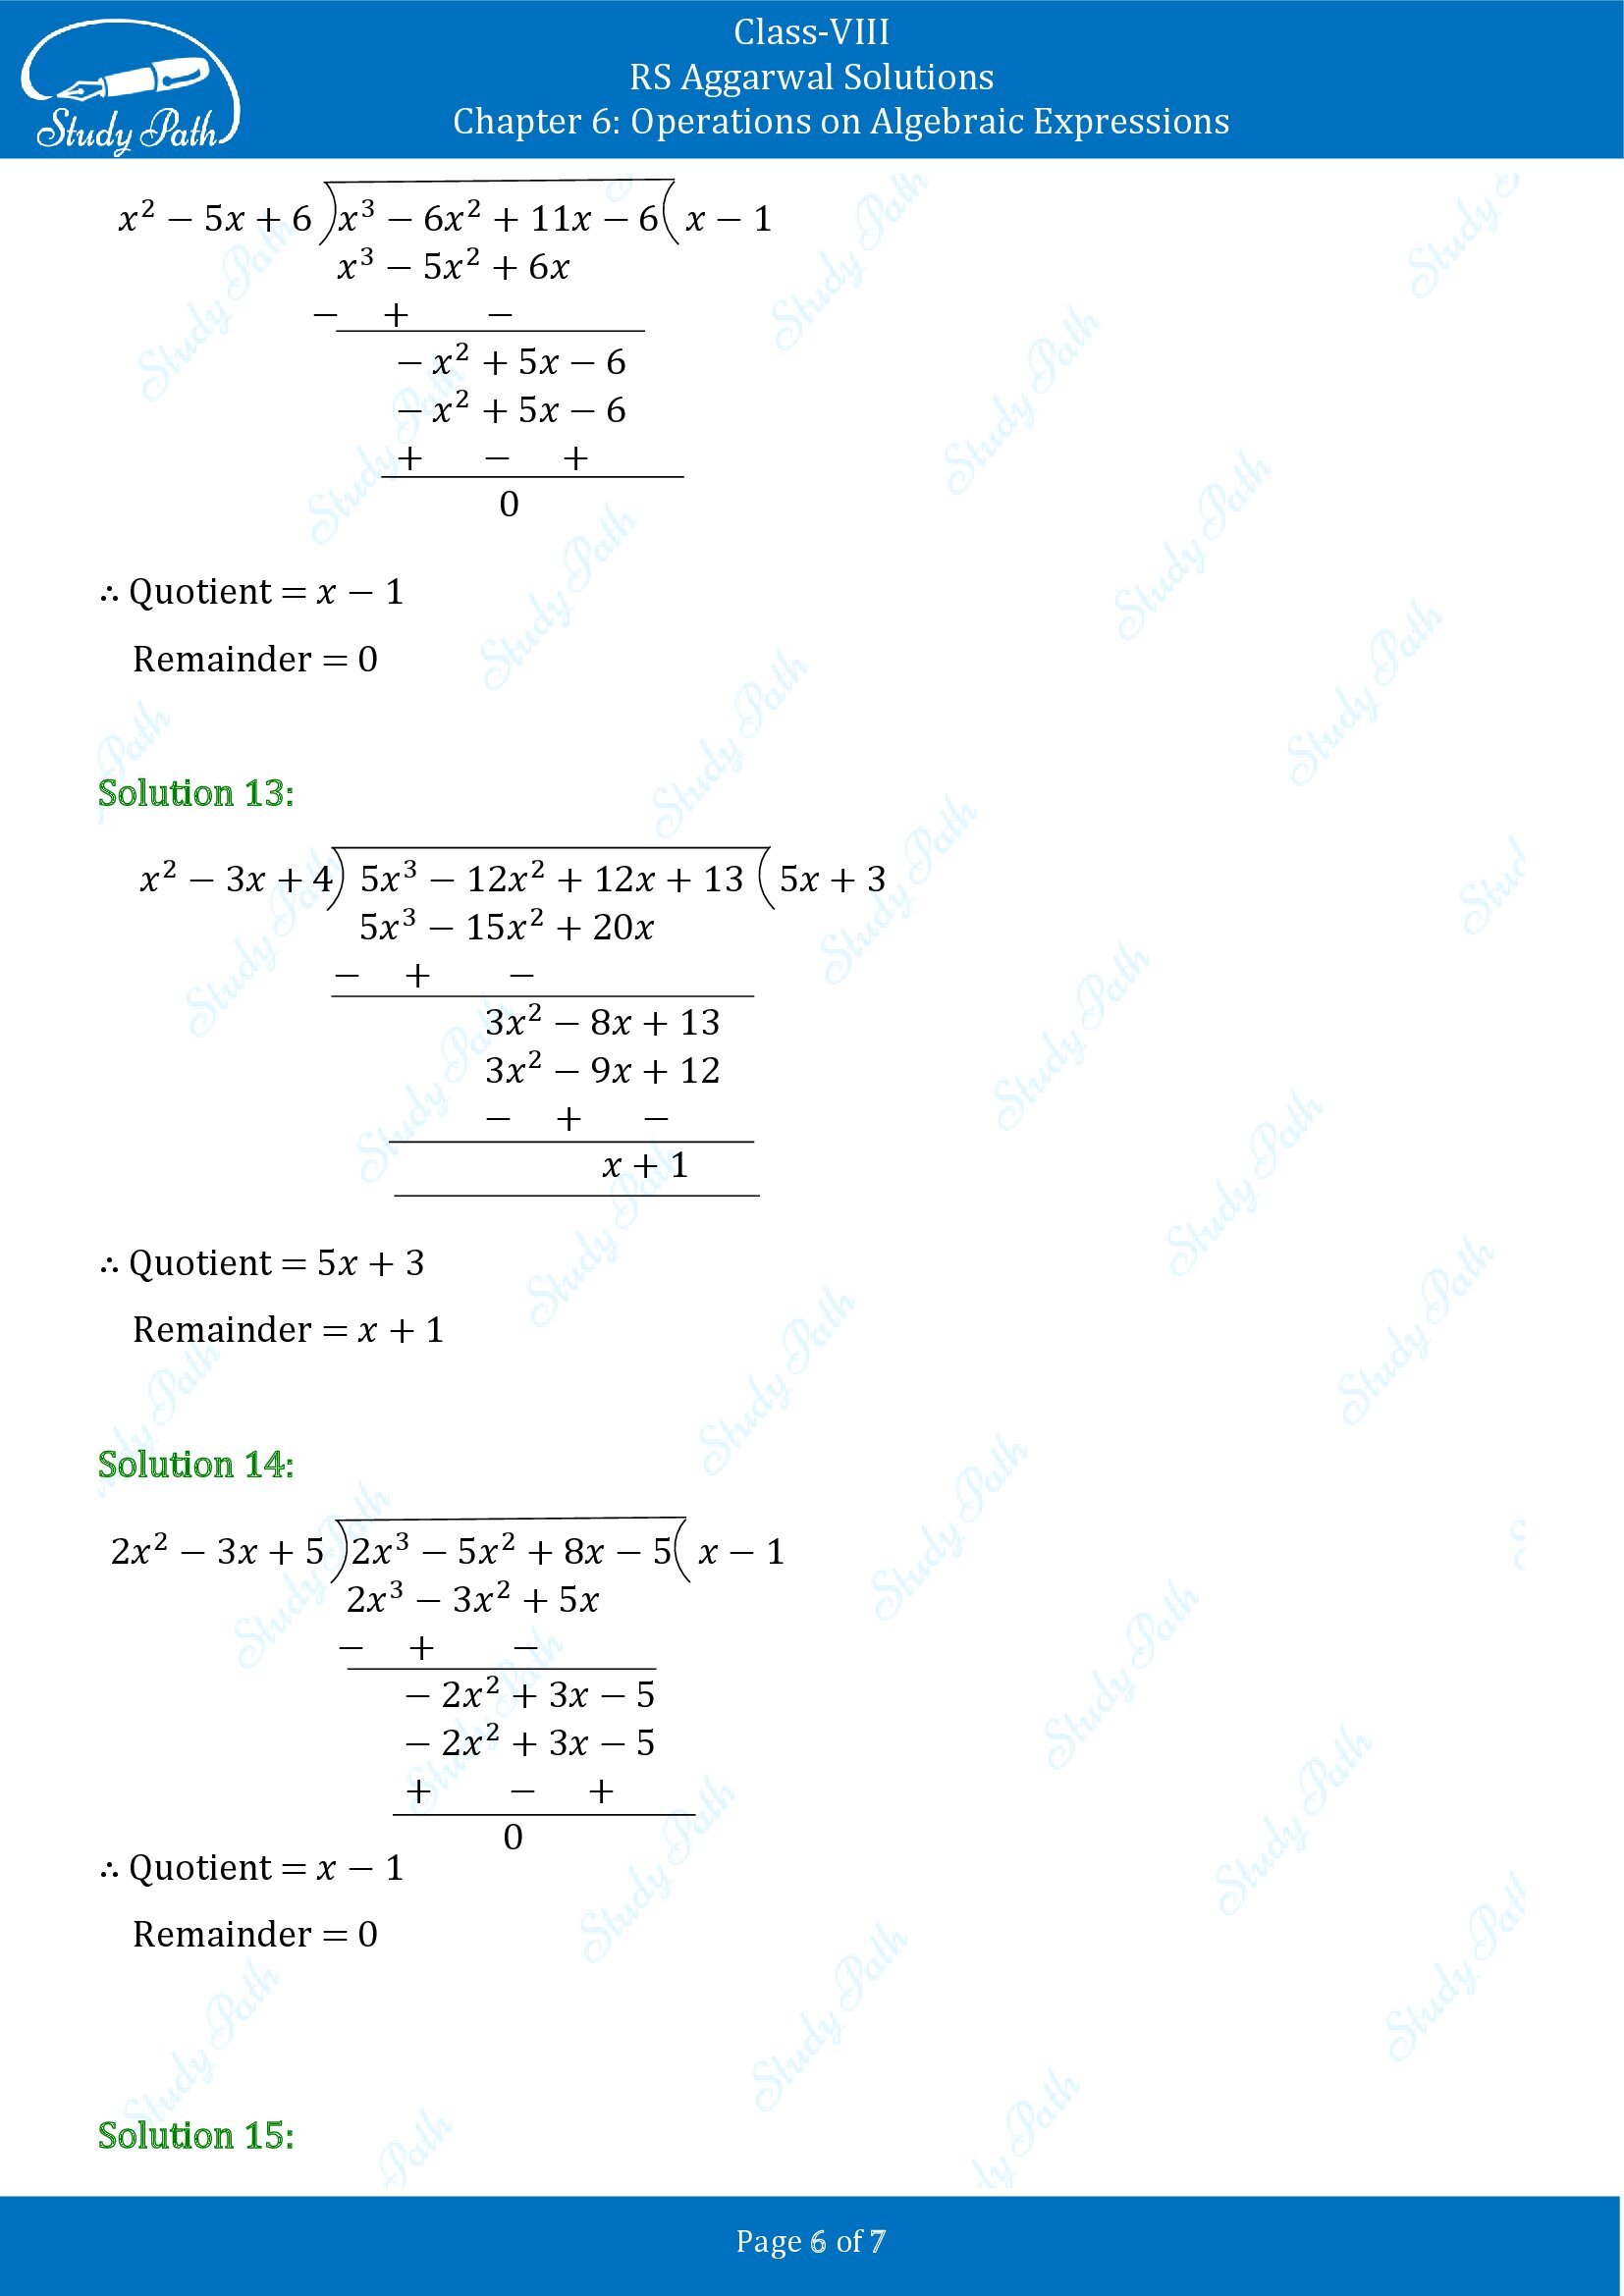 RS Aggarwal Solutions Class 8 Chapter 6 Operations on Algebraic Expressions Exercise 6C 00006